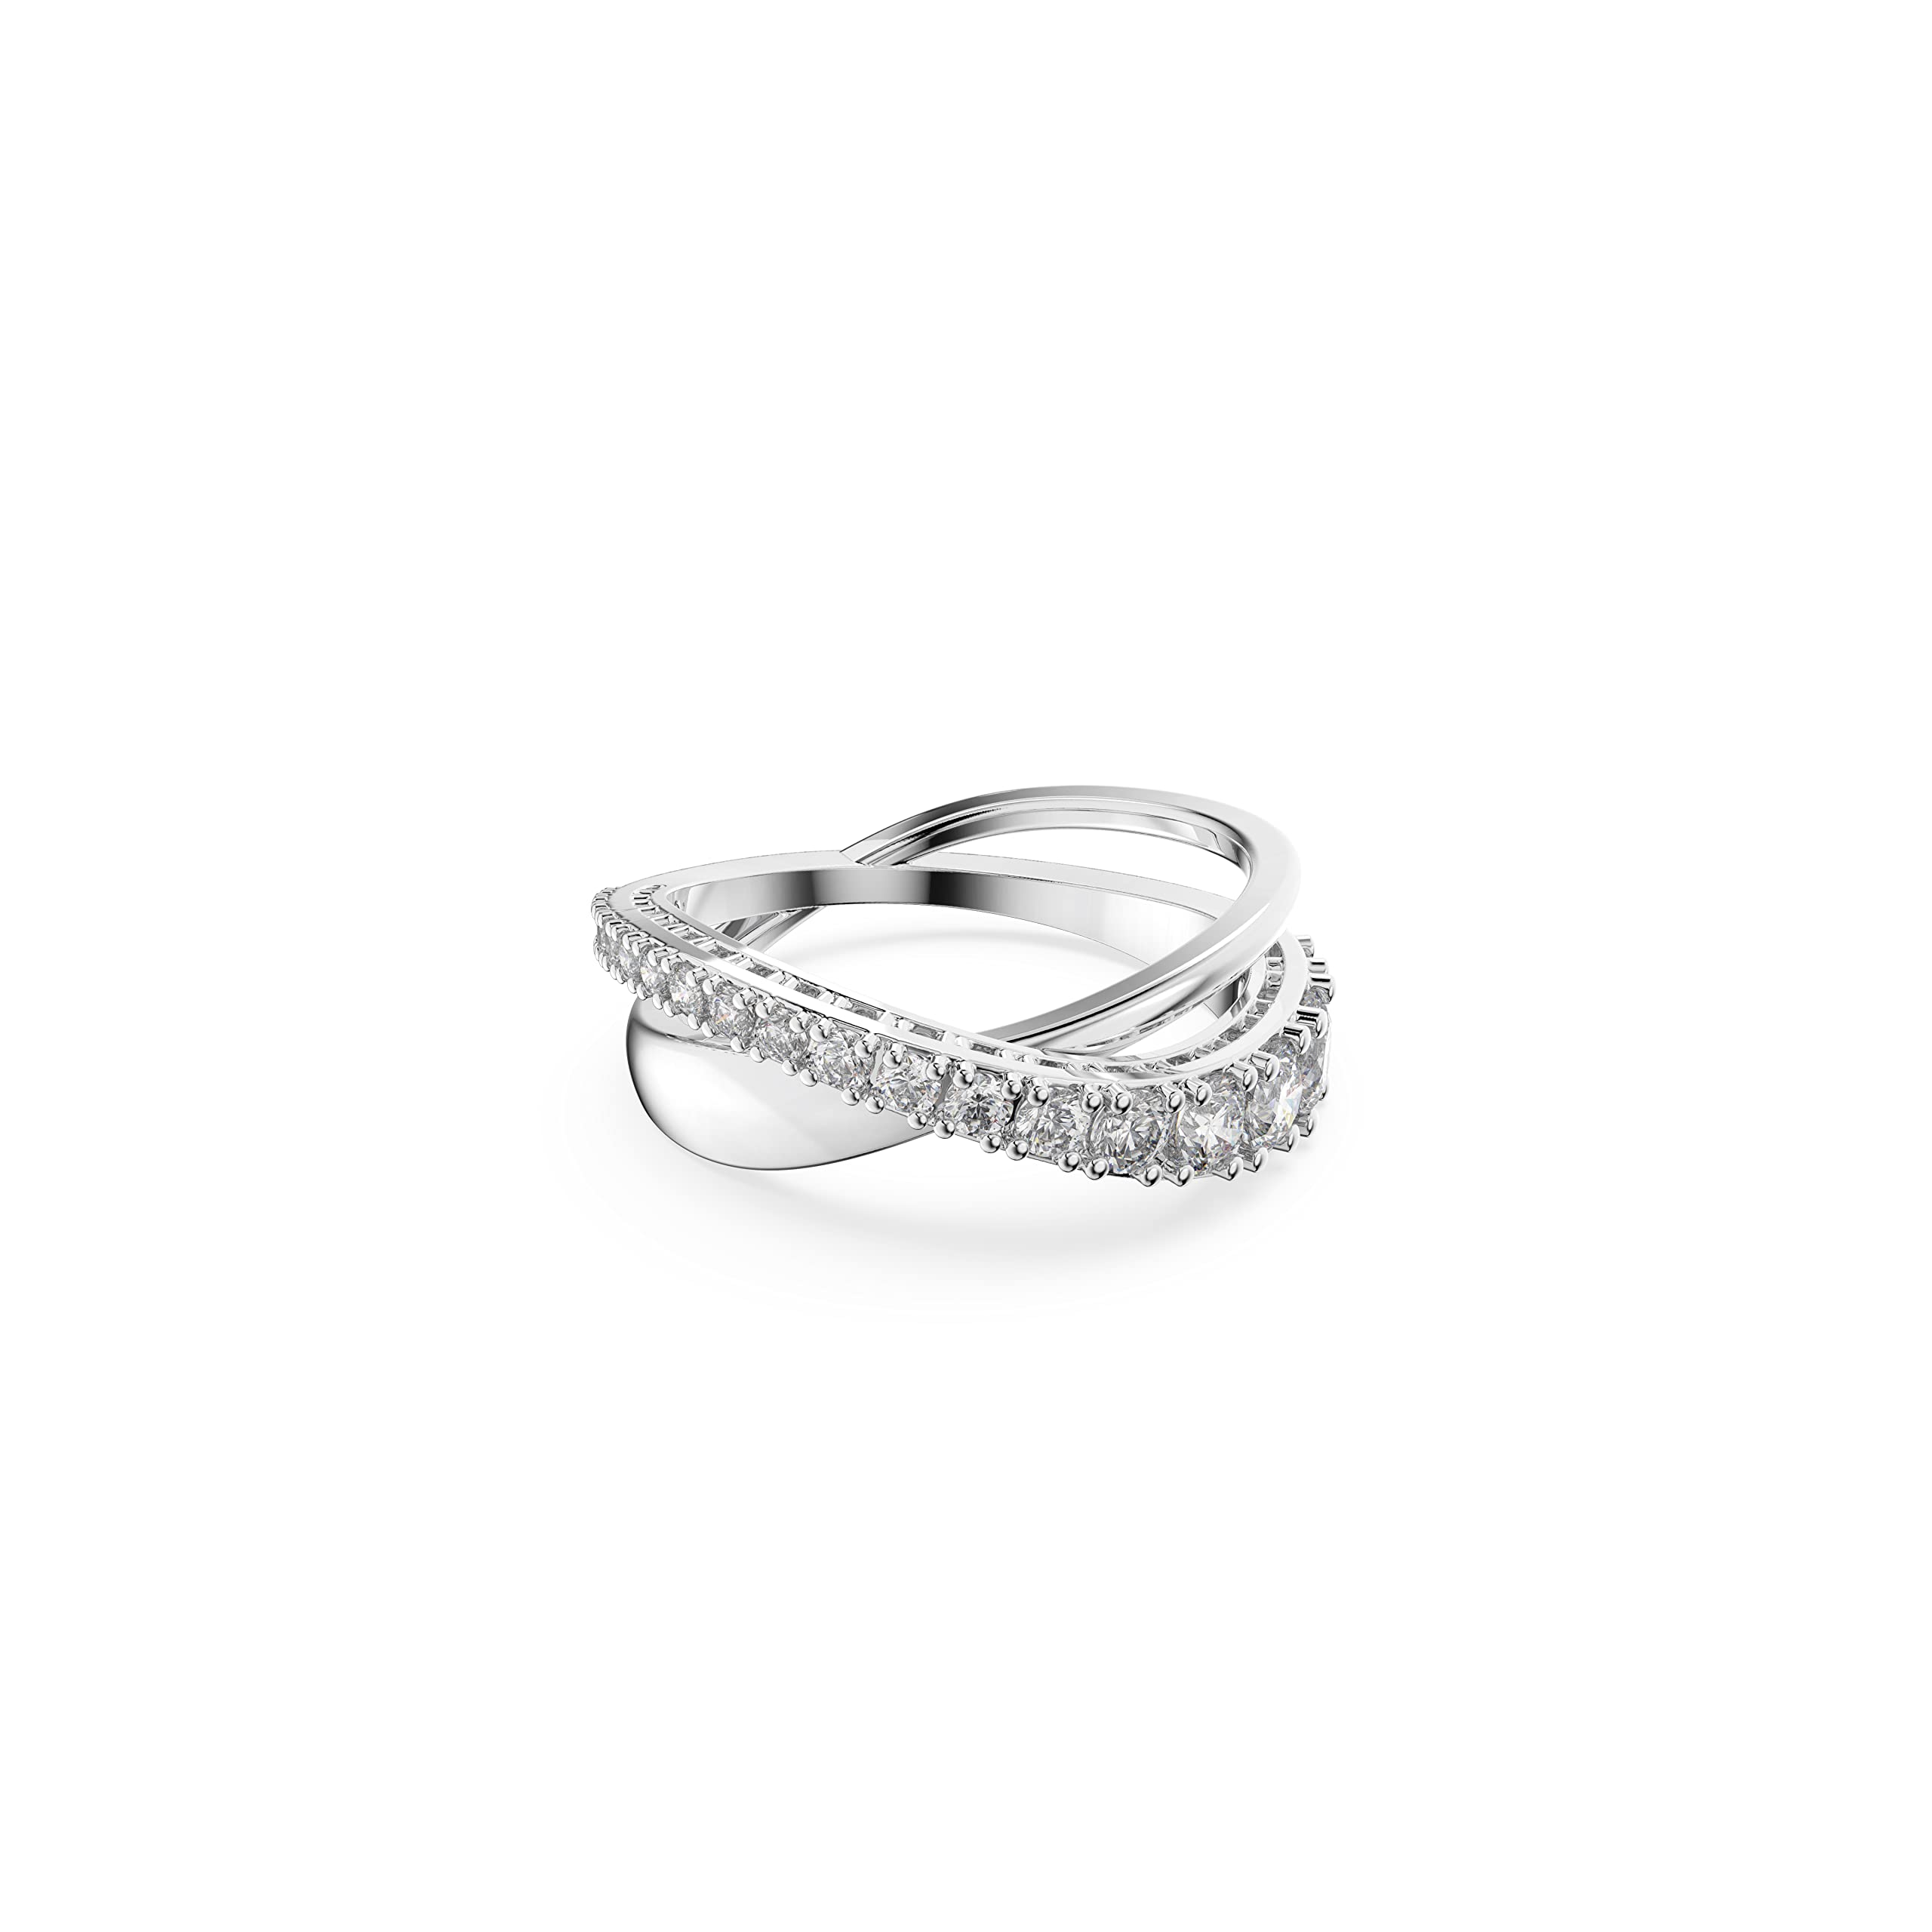 Swarovski Womens Twist Rows Ring, White crystal Stones in a Spiral Design, Rhodium Plated Setting, Size 50